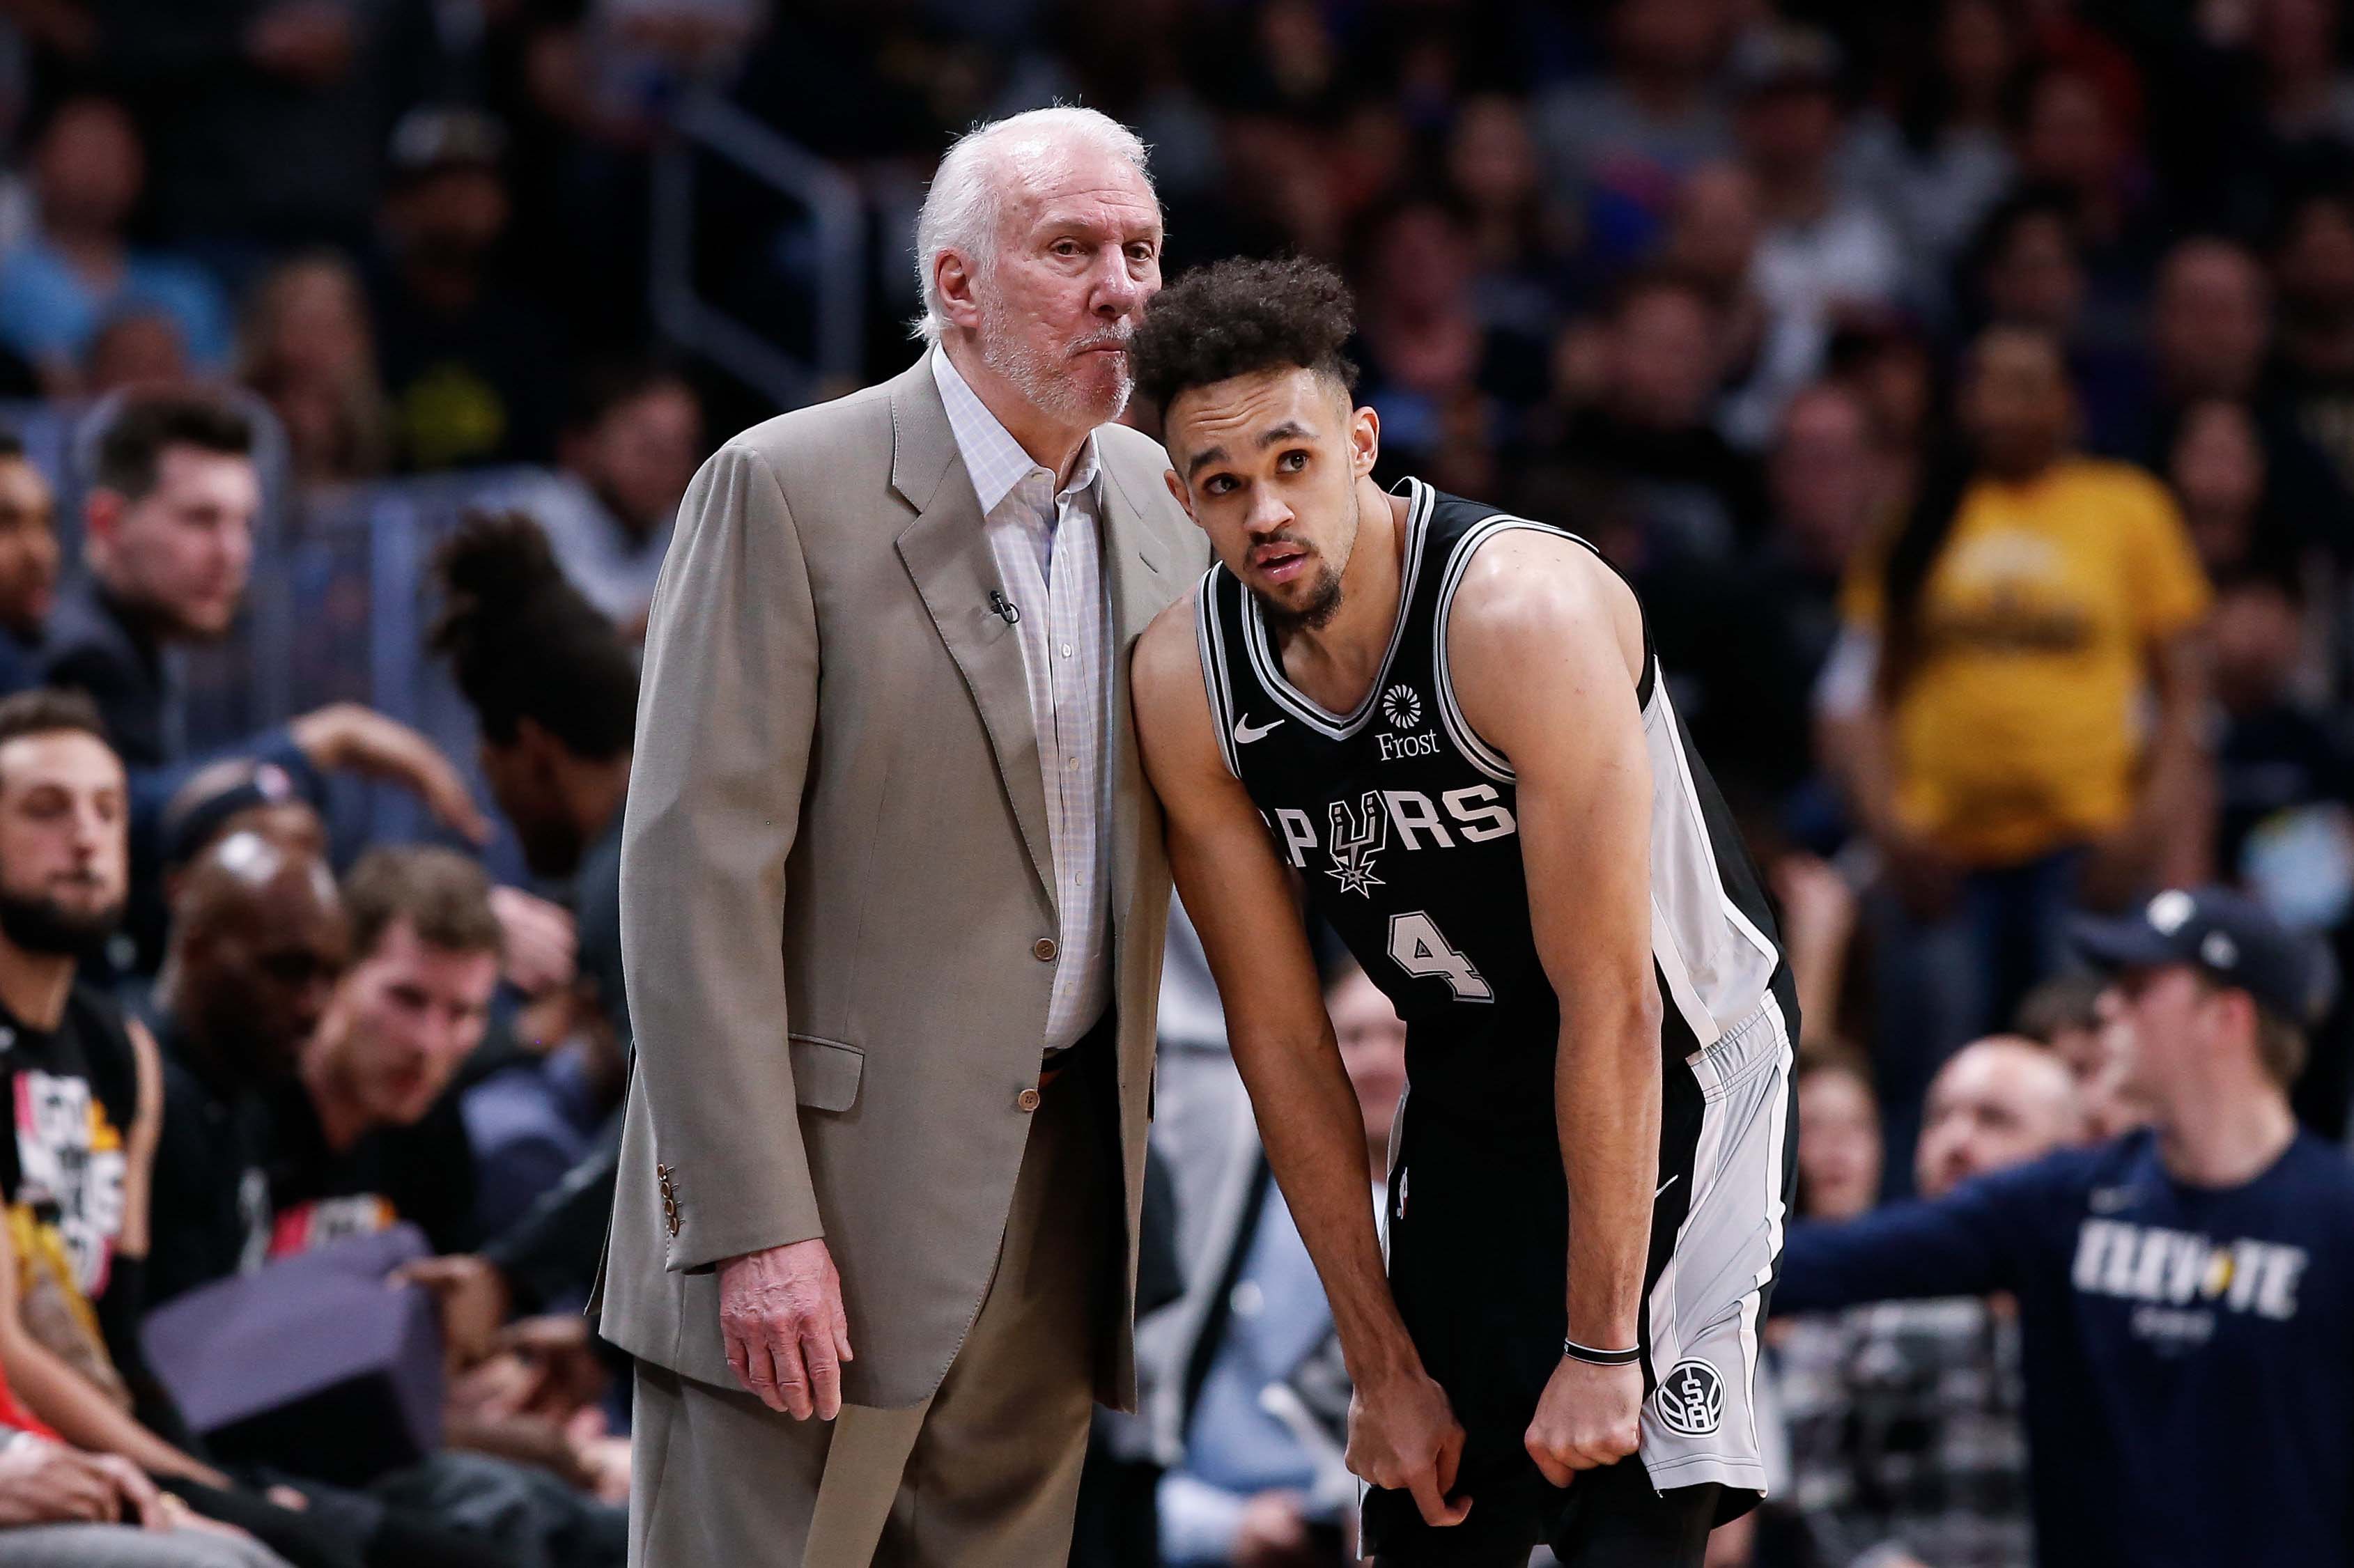 Apr 16, 2019; Denver, CO, USA; San Antonio Spurs head coach Gregg Popovich talks with guard Derrick White (4) in the second quarter against the Denver Nuggets in game two of the first round of the 2019 NBA Playoffs at the Pepsi Center.